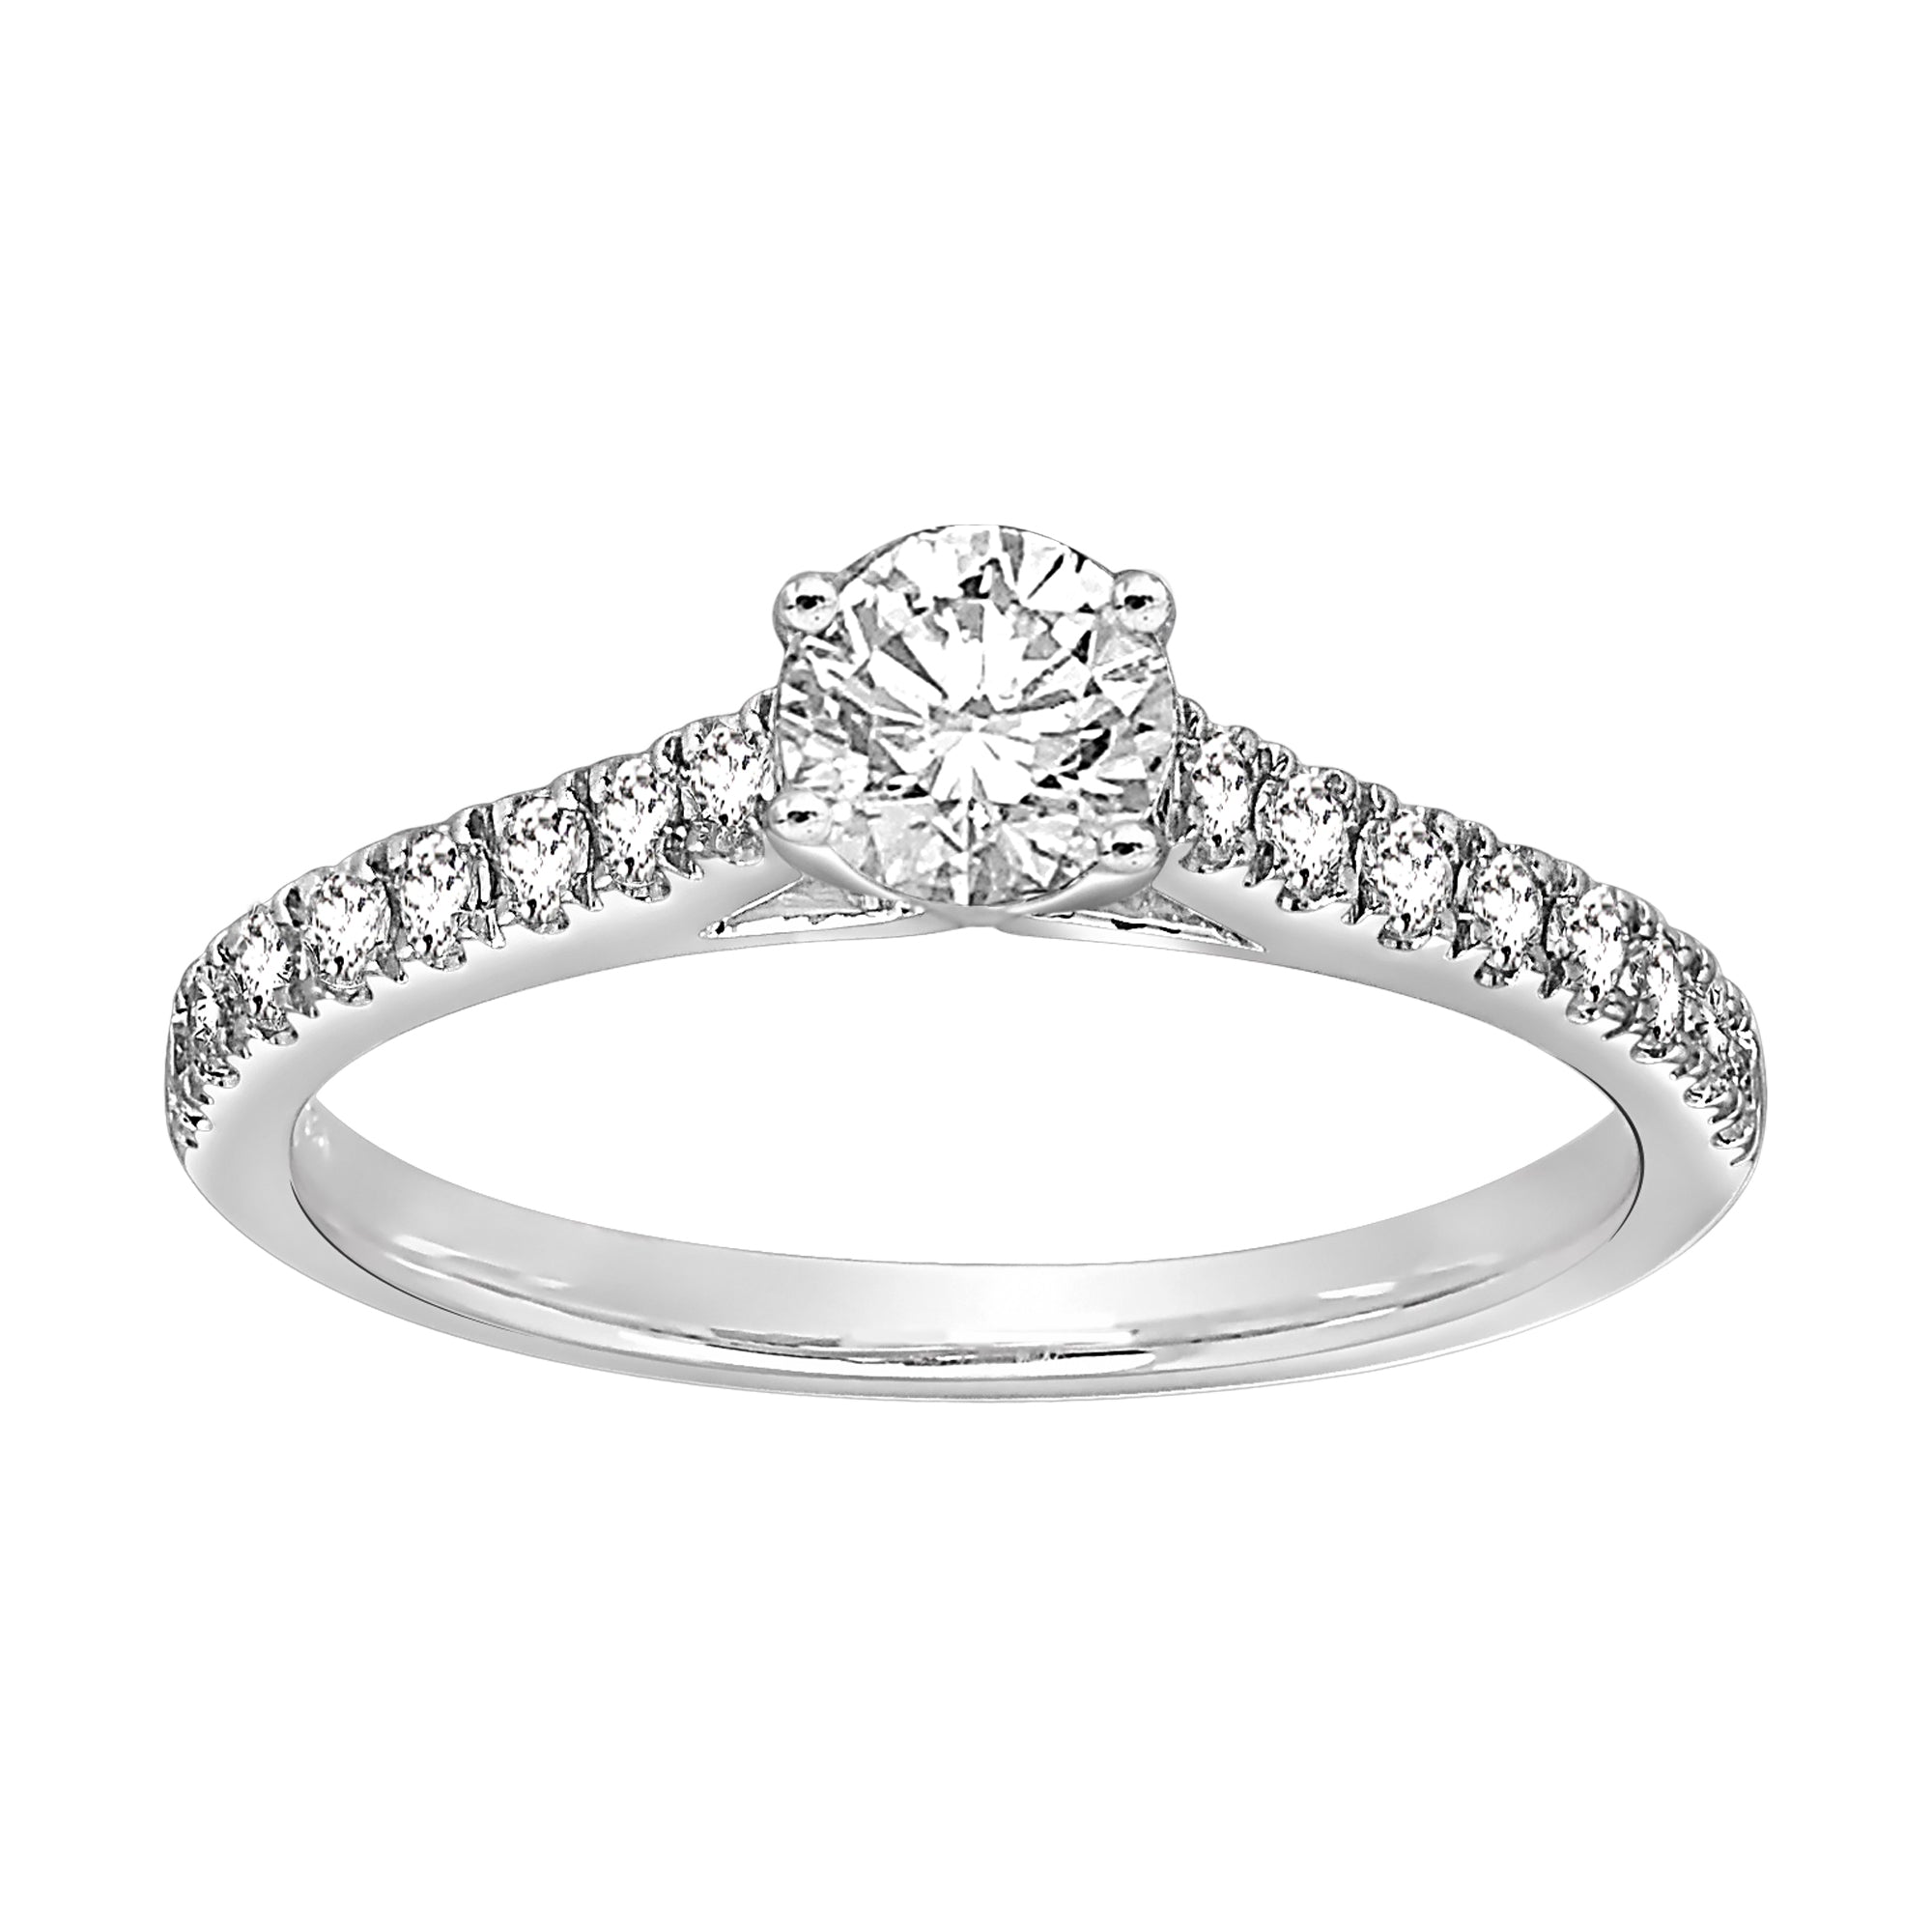 Sterling Silver Cubic Zirconia 0.33ct Ring - AK1006 - Hallmark Jewellers Formby & The Jewellers Bench Widnes